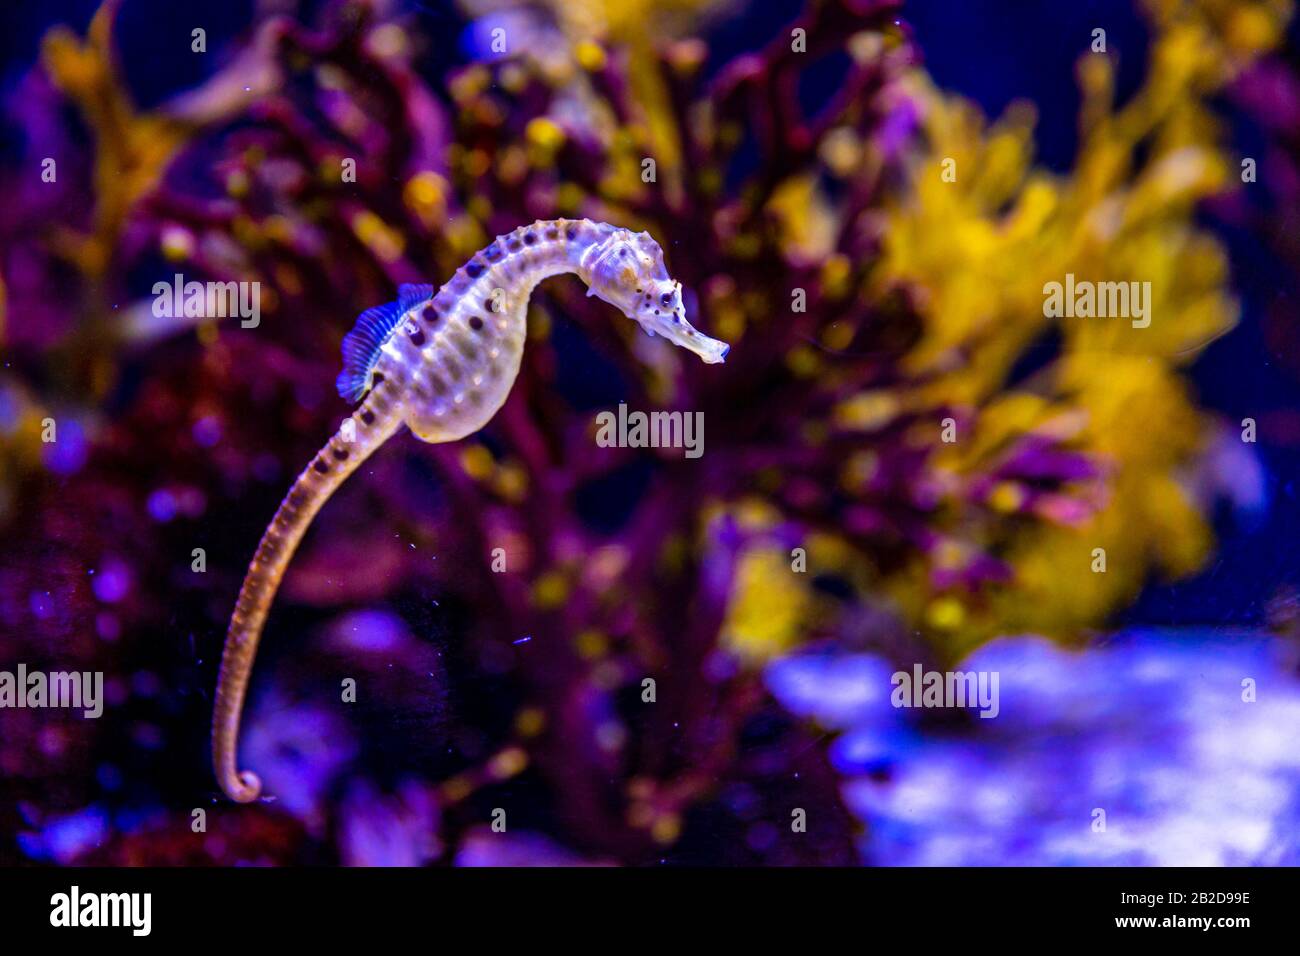 Potbelly Seahorse in Aquarium tank, with purple coral reef in background Stock Photo